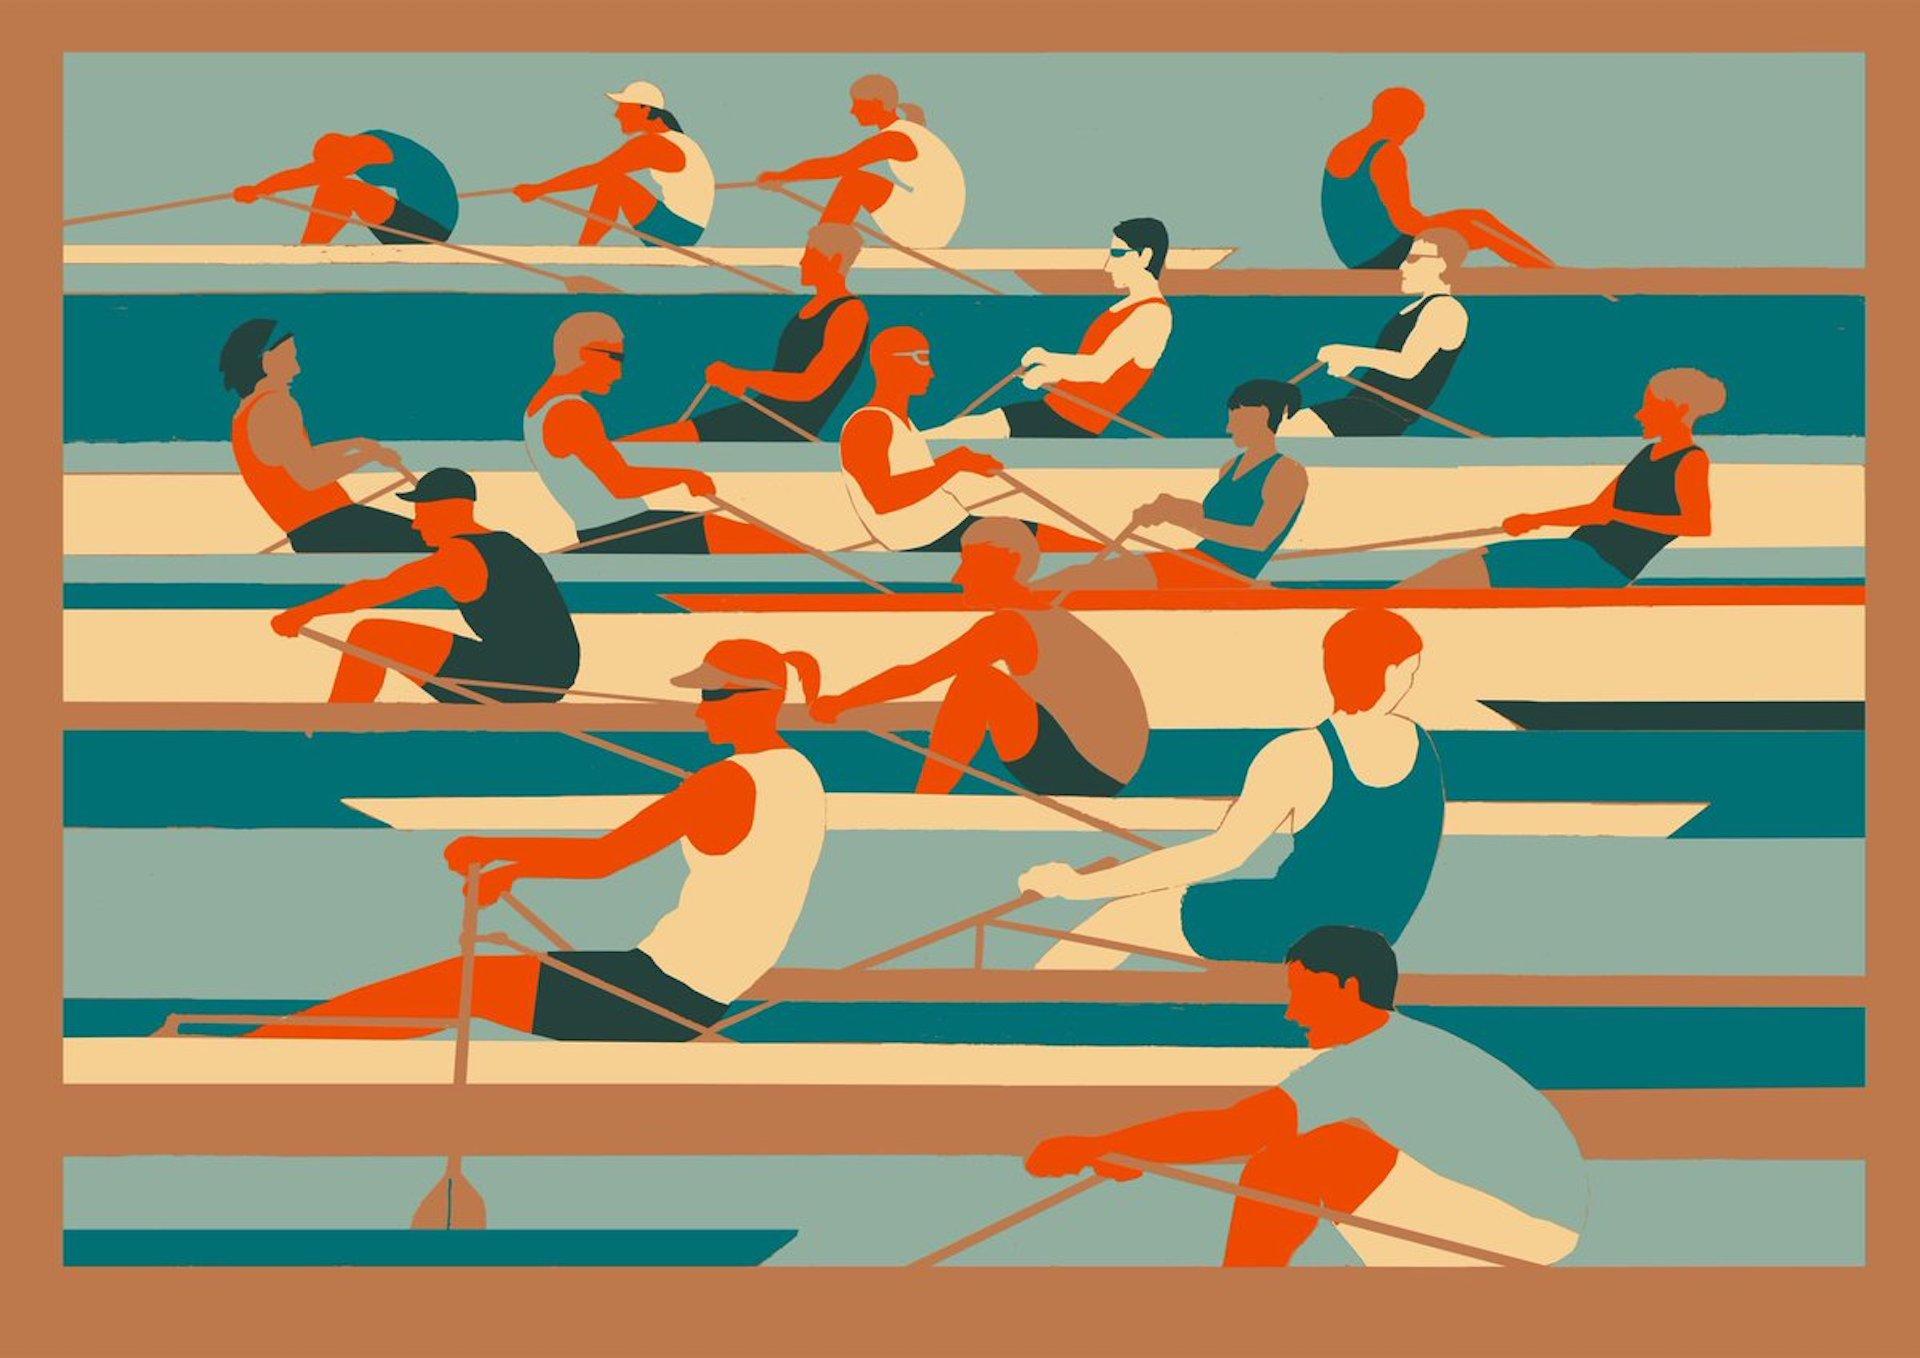 Eliza Southwood
Rowers
Limited Edition Screen Print
Edition of 60
Image size: H:37.5cm x W:55.5cm
Sheet size: H:42cm x W:59.5cm
Signed and Numbered
Sold Unframed
Please note that any insitu images are purely an indication of how a piece may